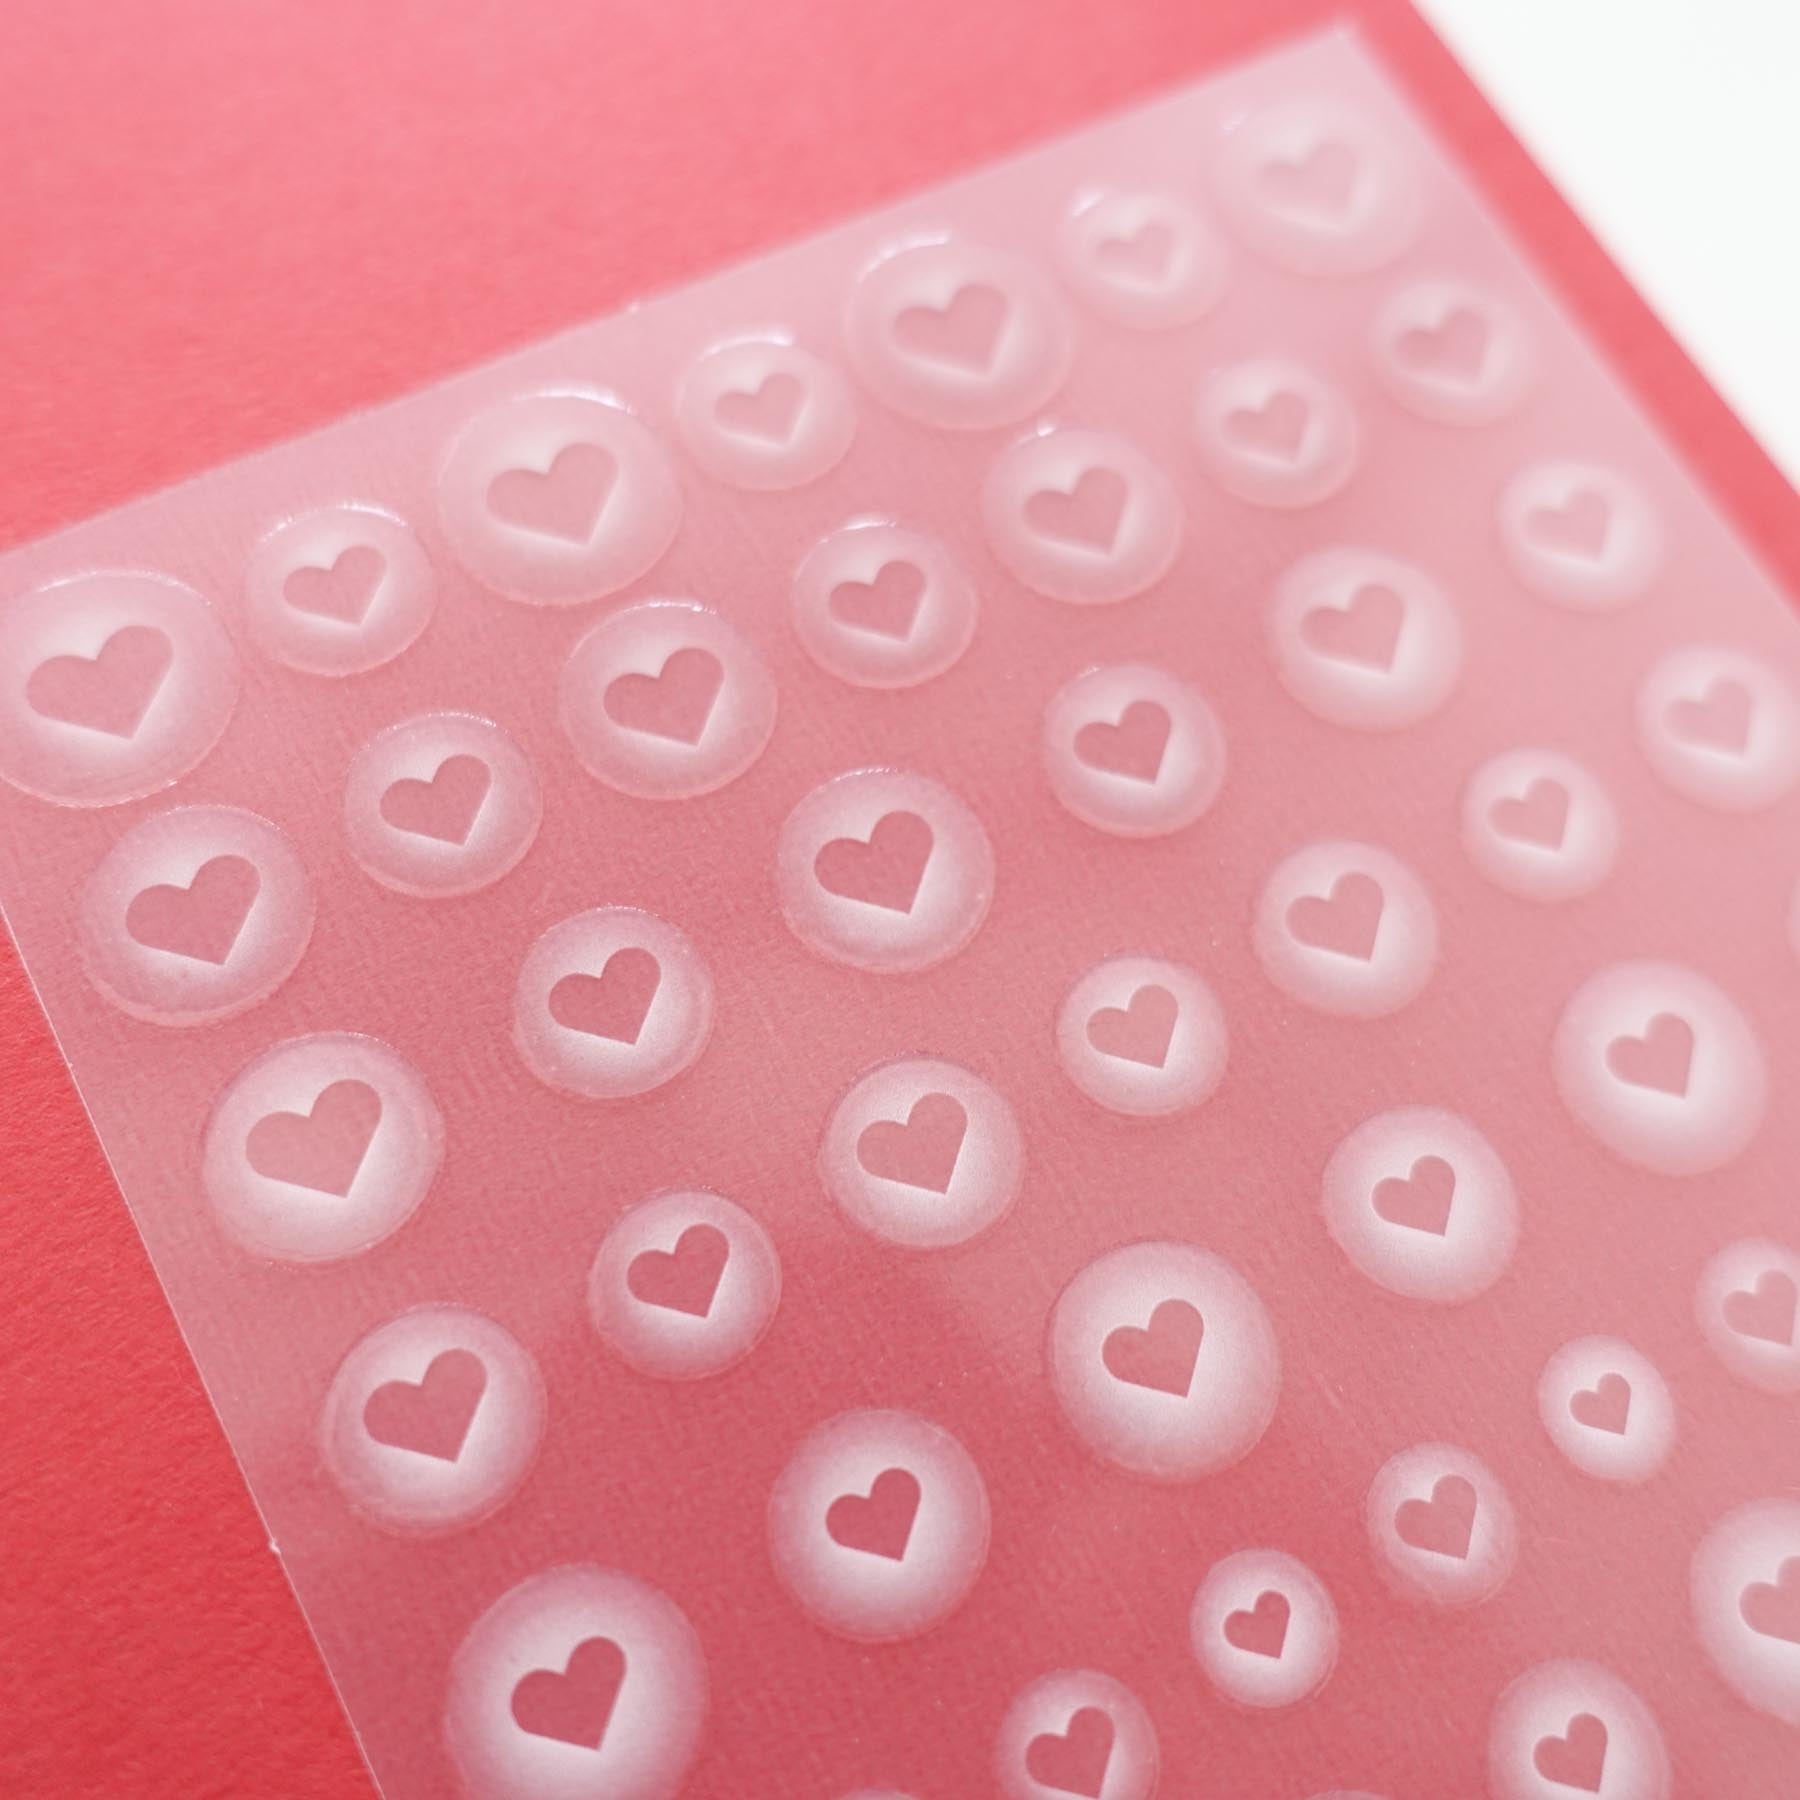 Airbrushed White Hearts Clear-Backed Decorative Stickers Sheet